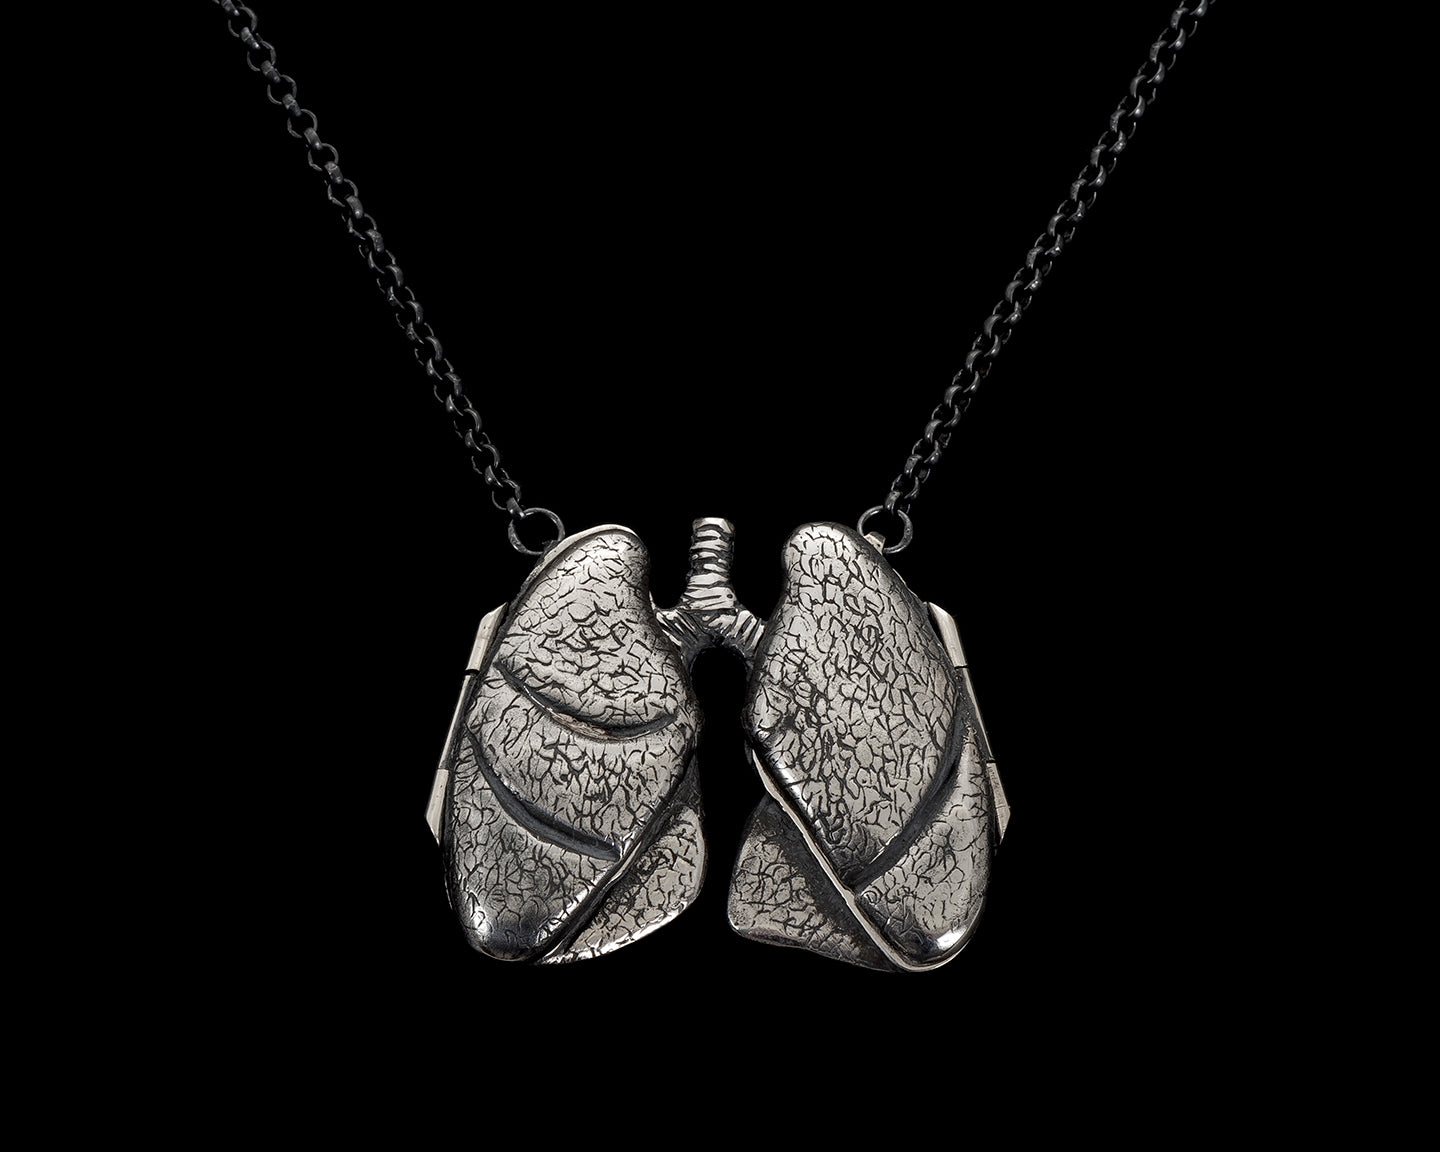 Anatomical, anatomy, lung locket, open lungs, peggy skemp jewelry, silver lungs, bronchial, anatomy, medicine, medical jewelry, scientific illustration, peggy skemp jewelry